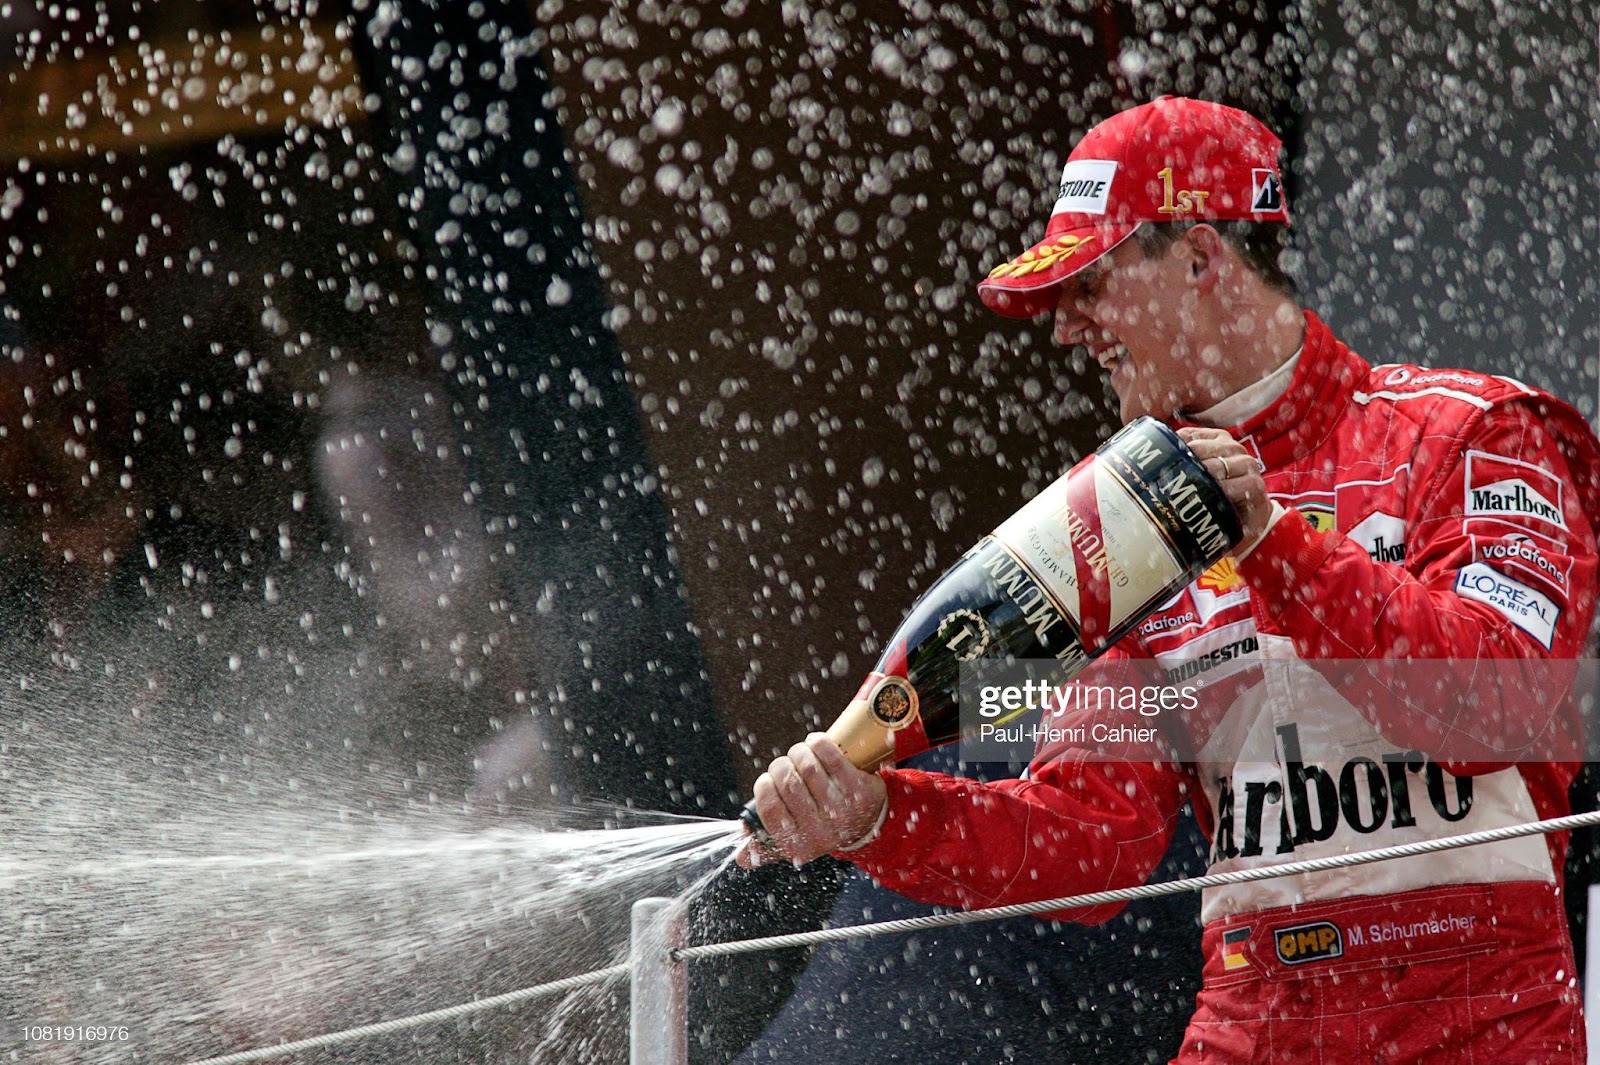 Michael Schumacher on the podium with champagne.